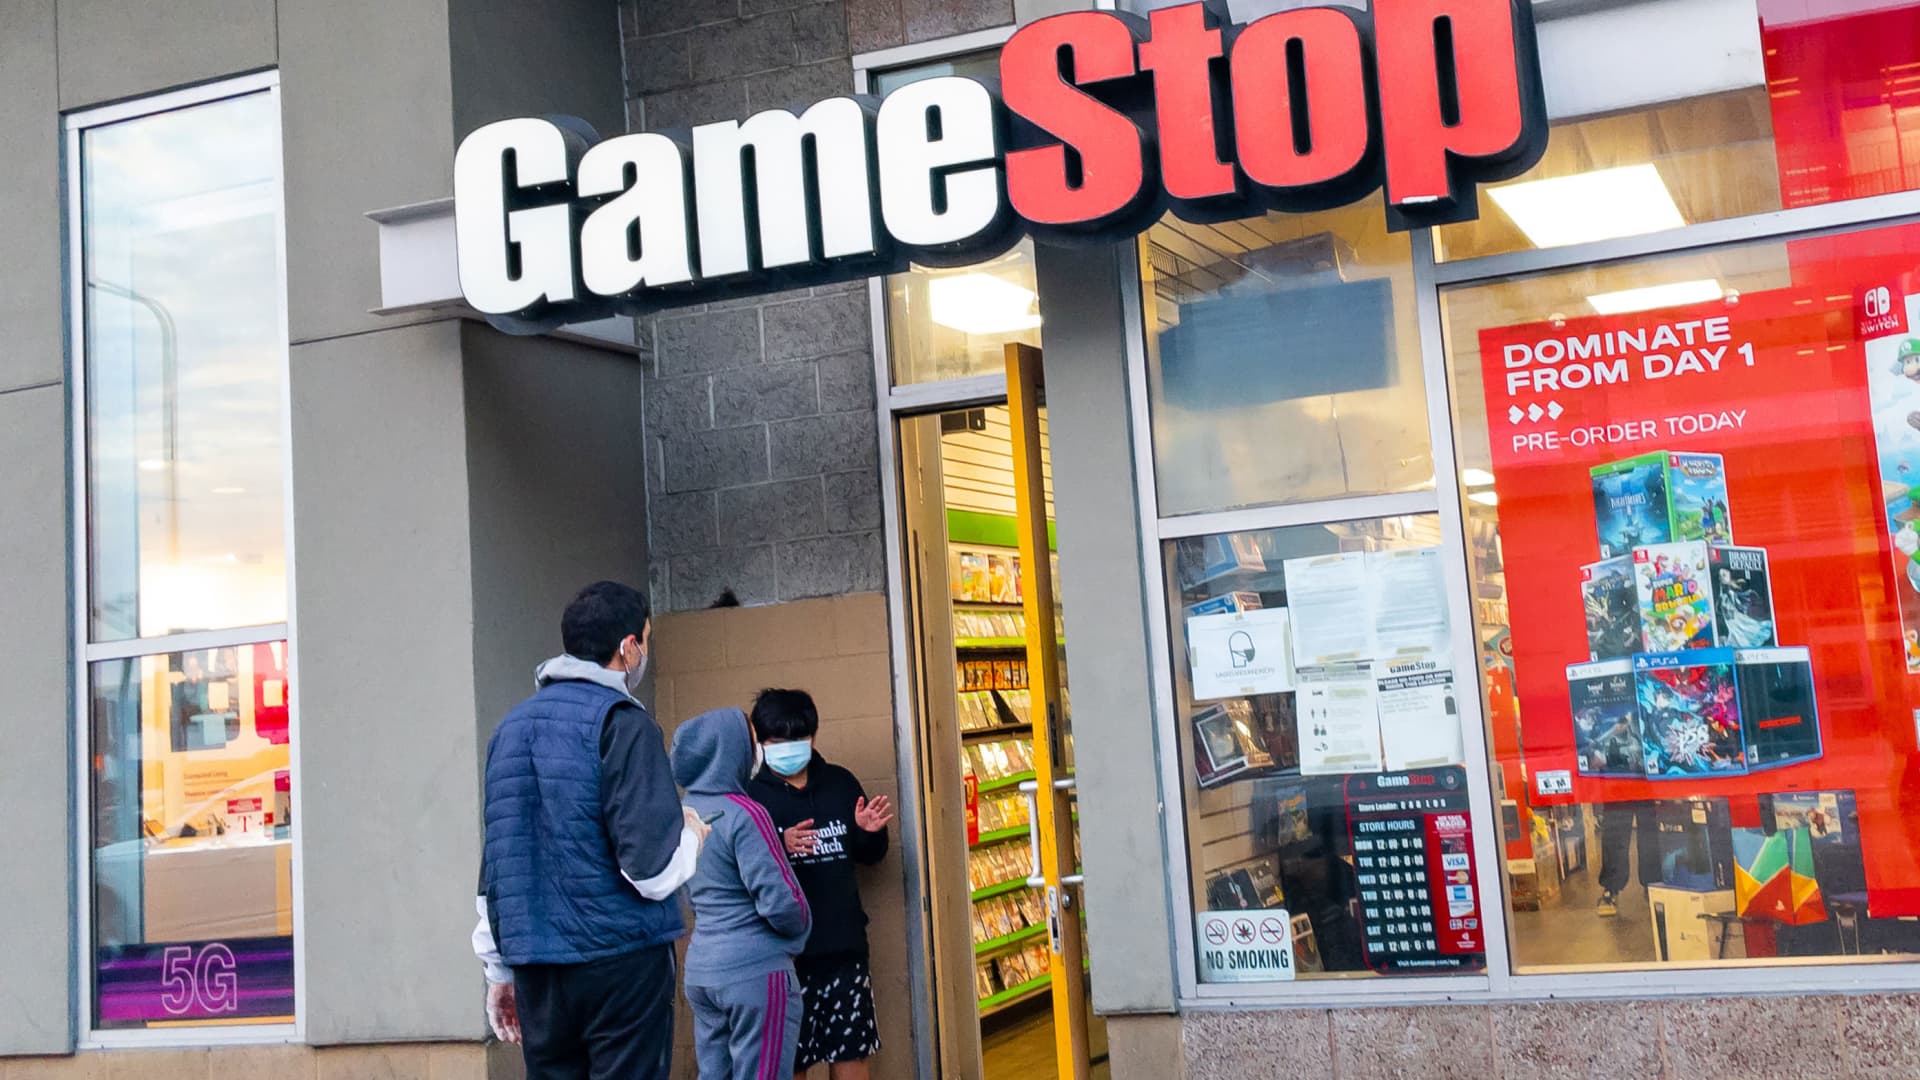 GameStop mayhem hits close to home for co-founder's son, who's active on WallStreetBets